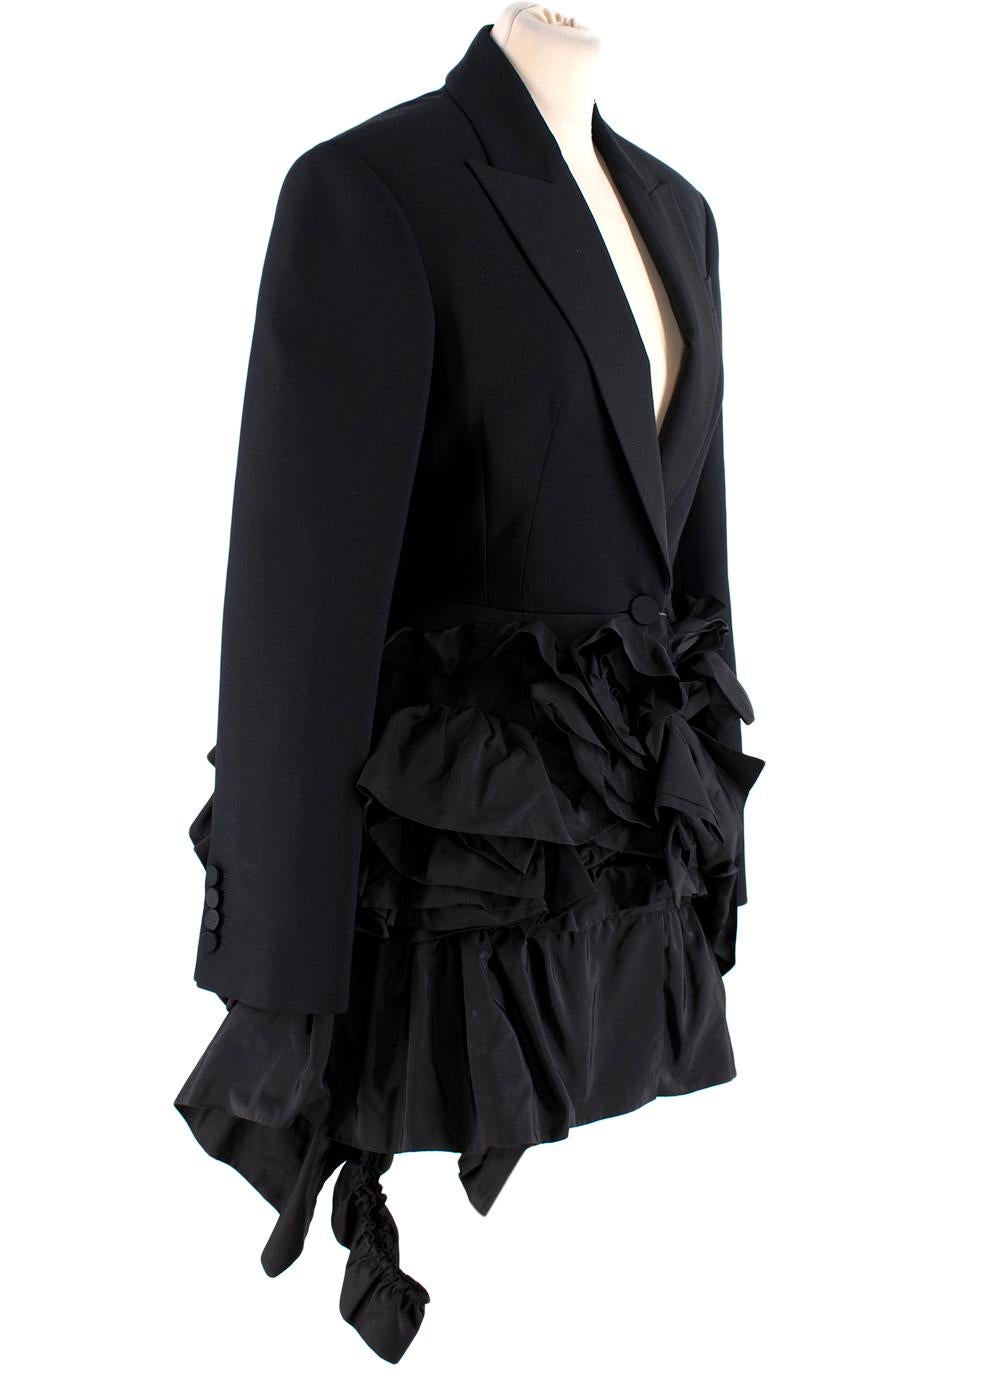 Alexander McQueen Wool-Silk Blazer with Silk Faille Ruffles
 

 - Elegant single-breasted wool-silk blazer jacket with a single button, decorated with voluminous silk faille ruffles across the hip and back
 - Fully lined
 

 Materials 
 63% Wool
